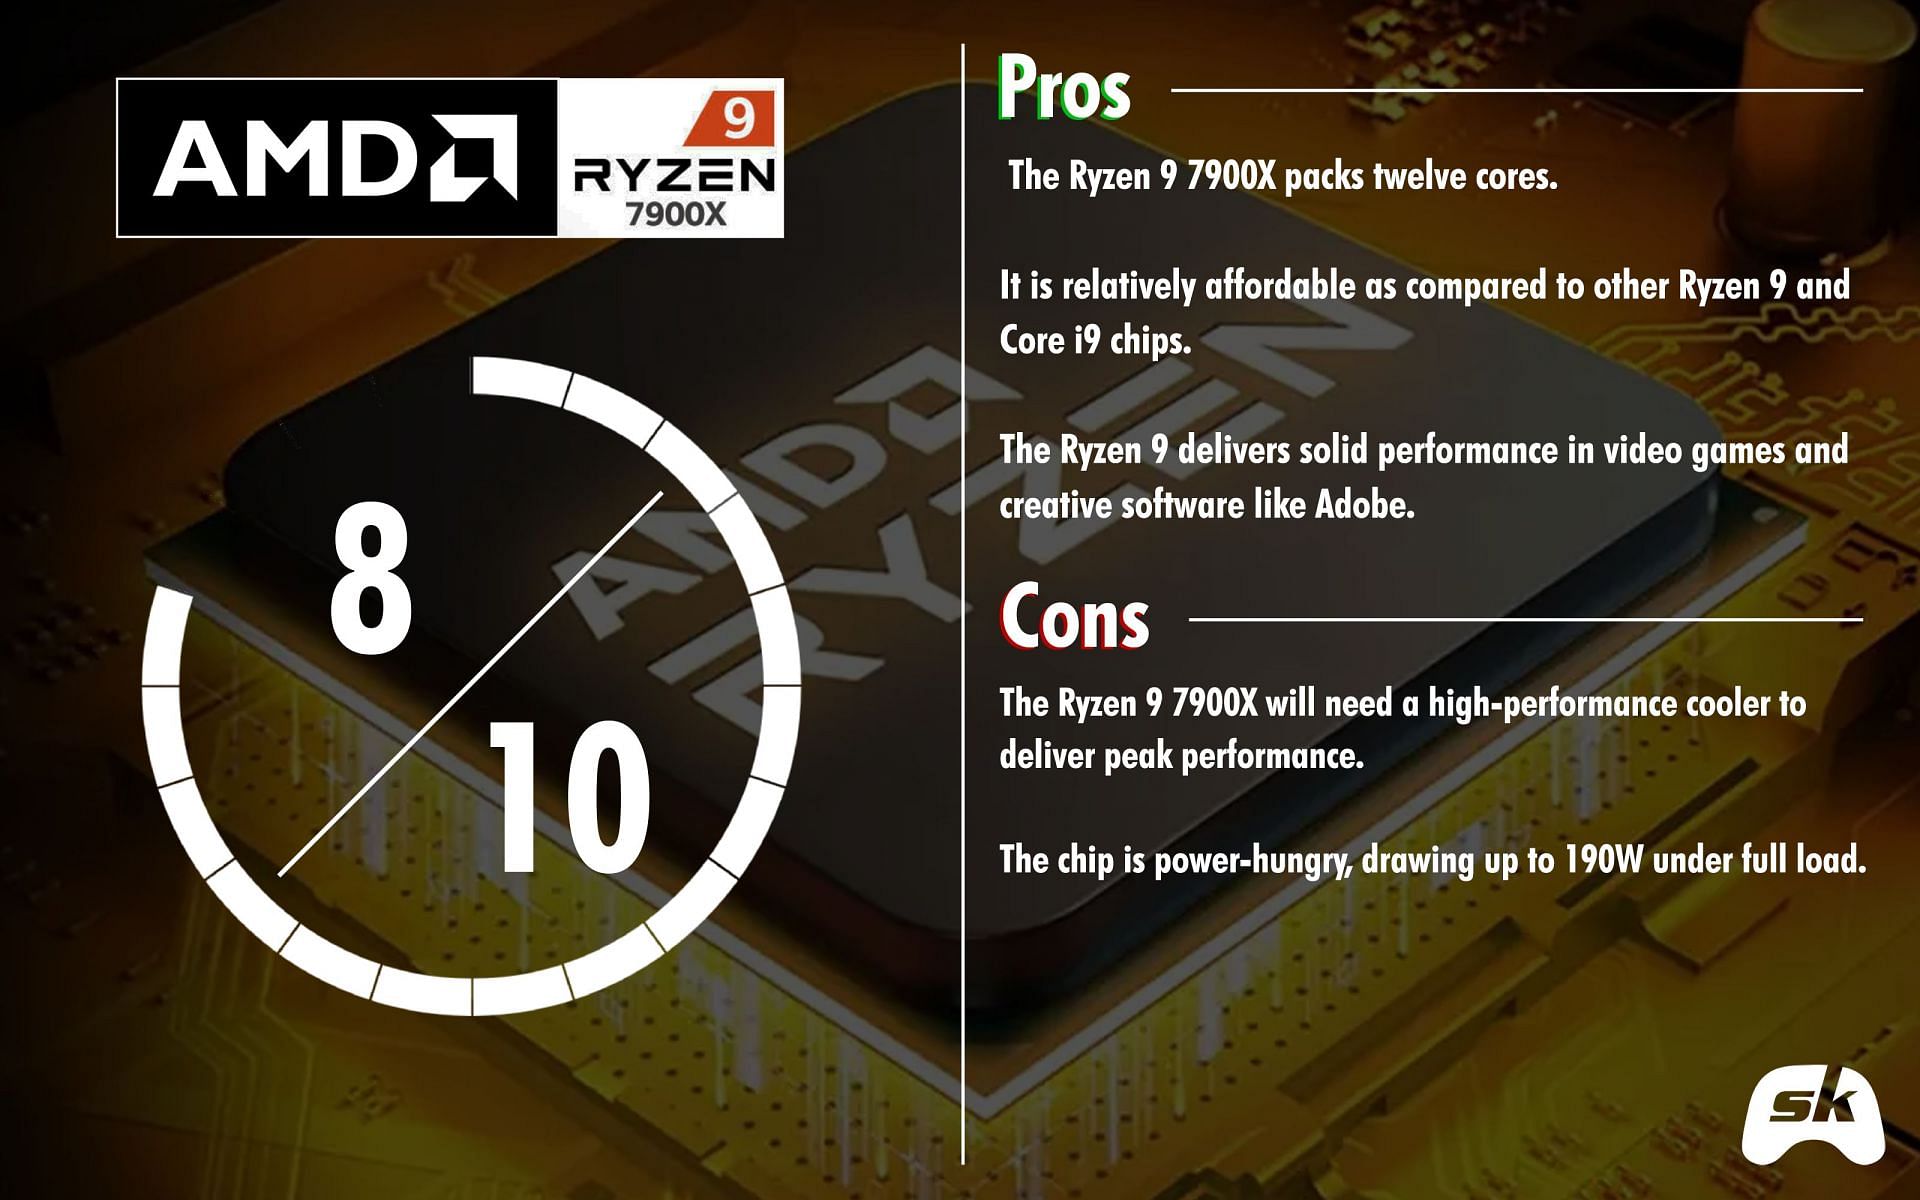 AMD Ryzen 9 7900X Reviews, Pros and Cons